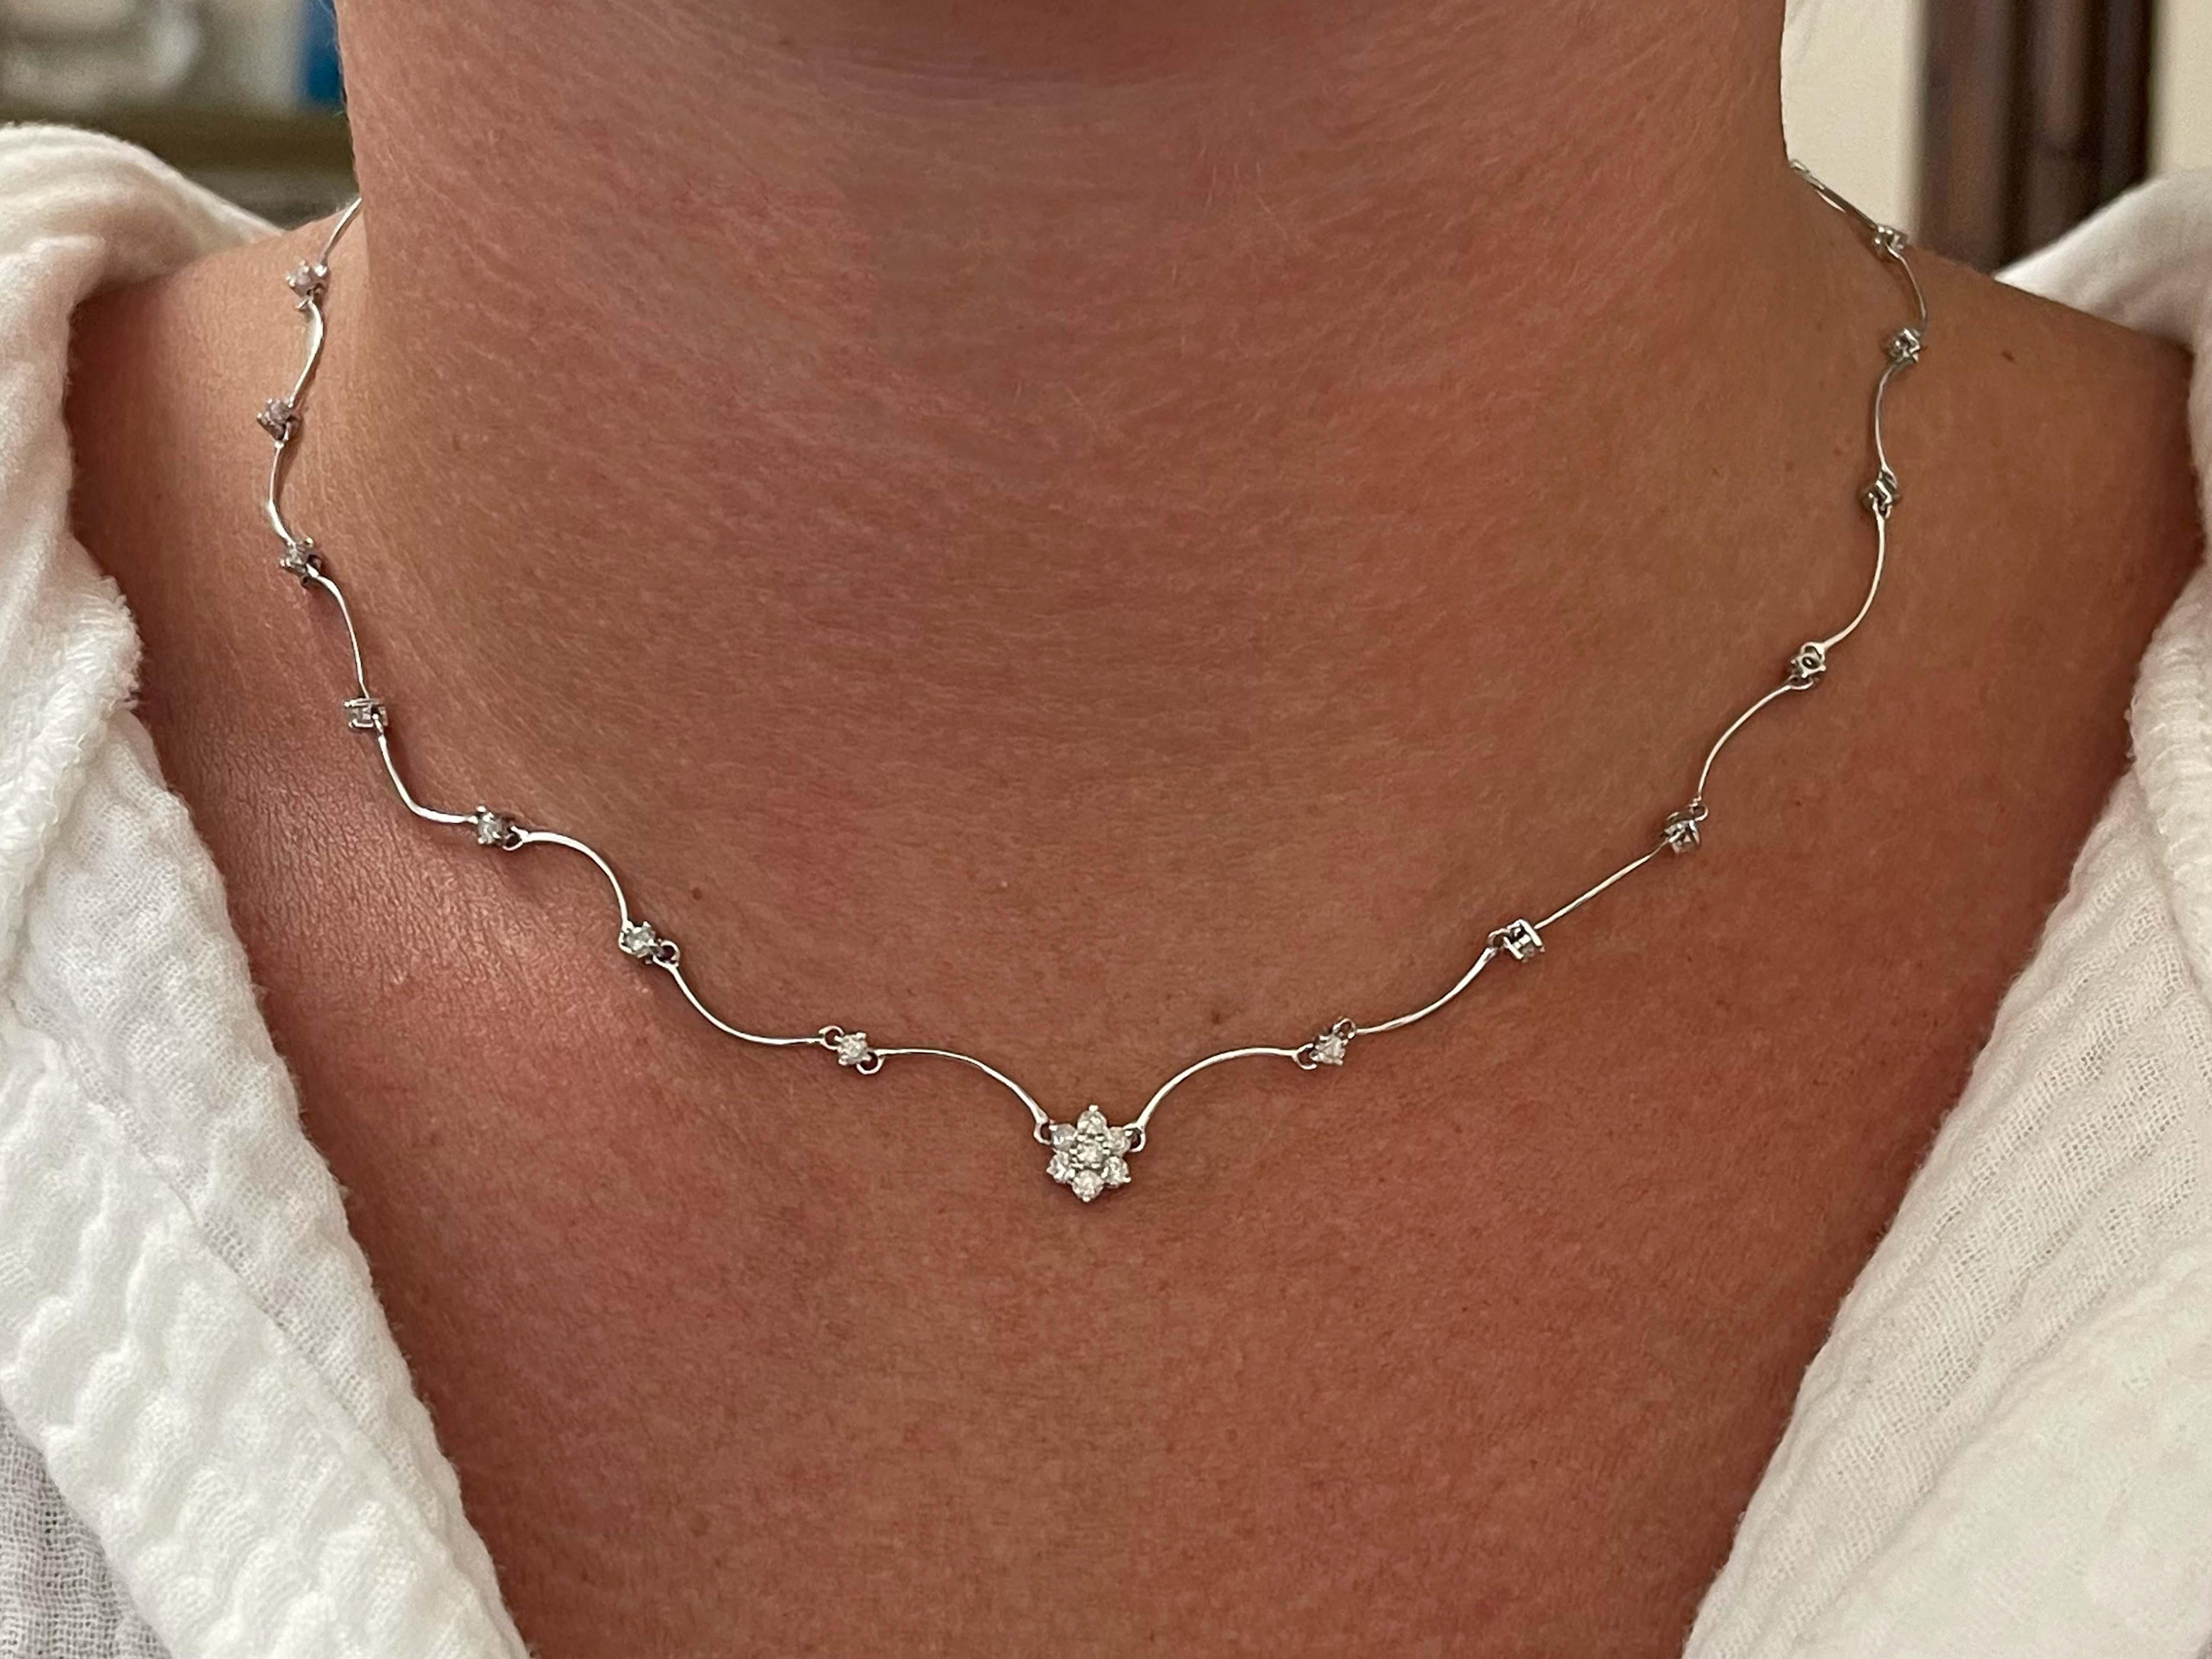 Item Specifications:

Style: Wavy Diamond Flower Diamond Necklace

Necklace Metal: 18k White Gold
​
​Total Weight: 6.2 Grams

Chain Length: 16